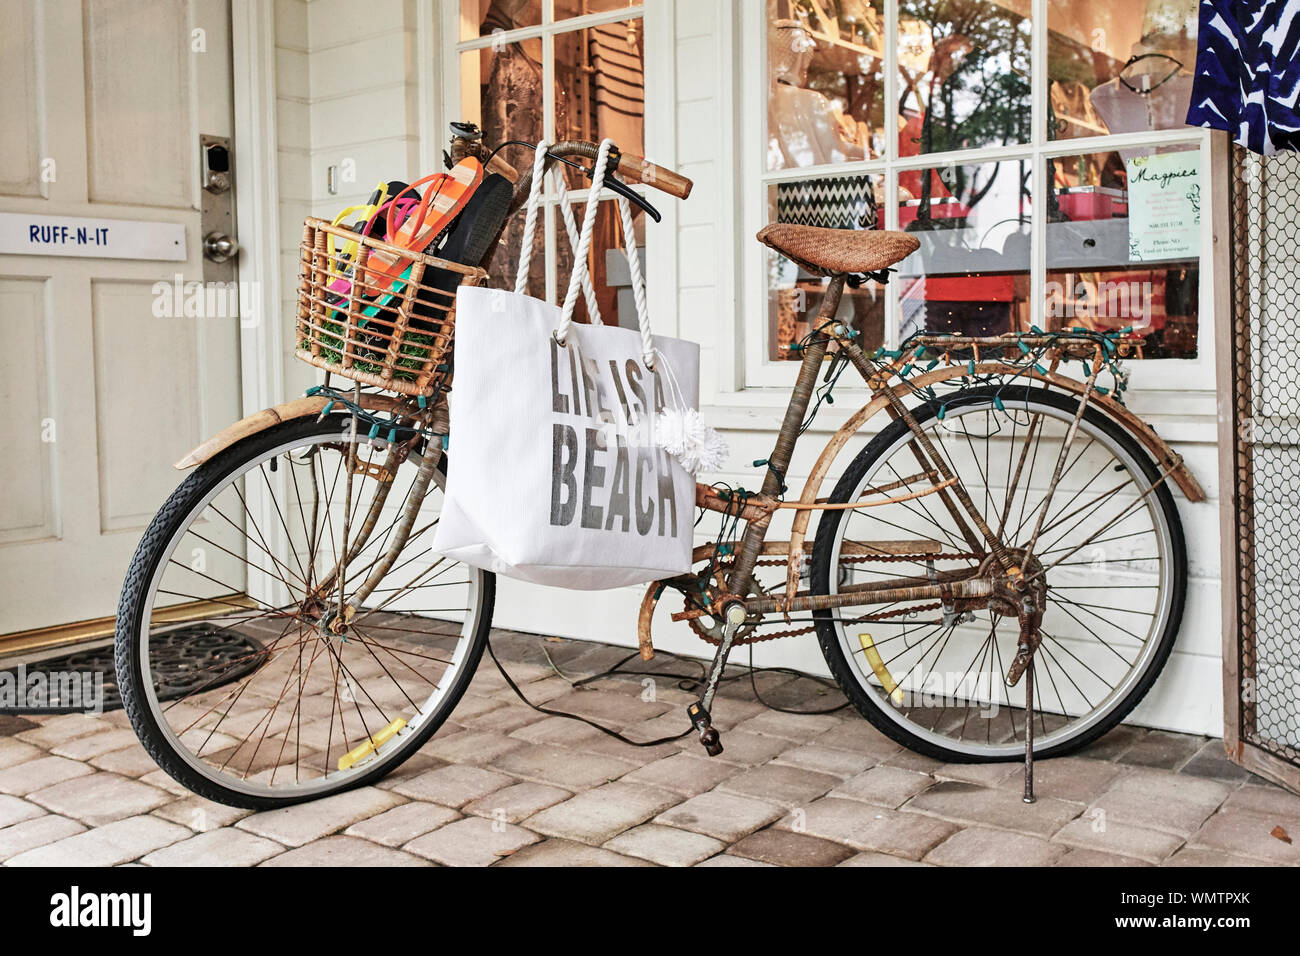 Bicycle decorated and used for advertising in front of a small store front in Seaside Florida, USA. Stock Photo